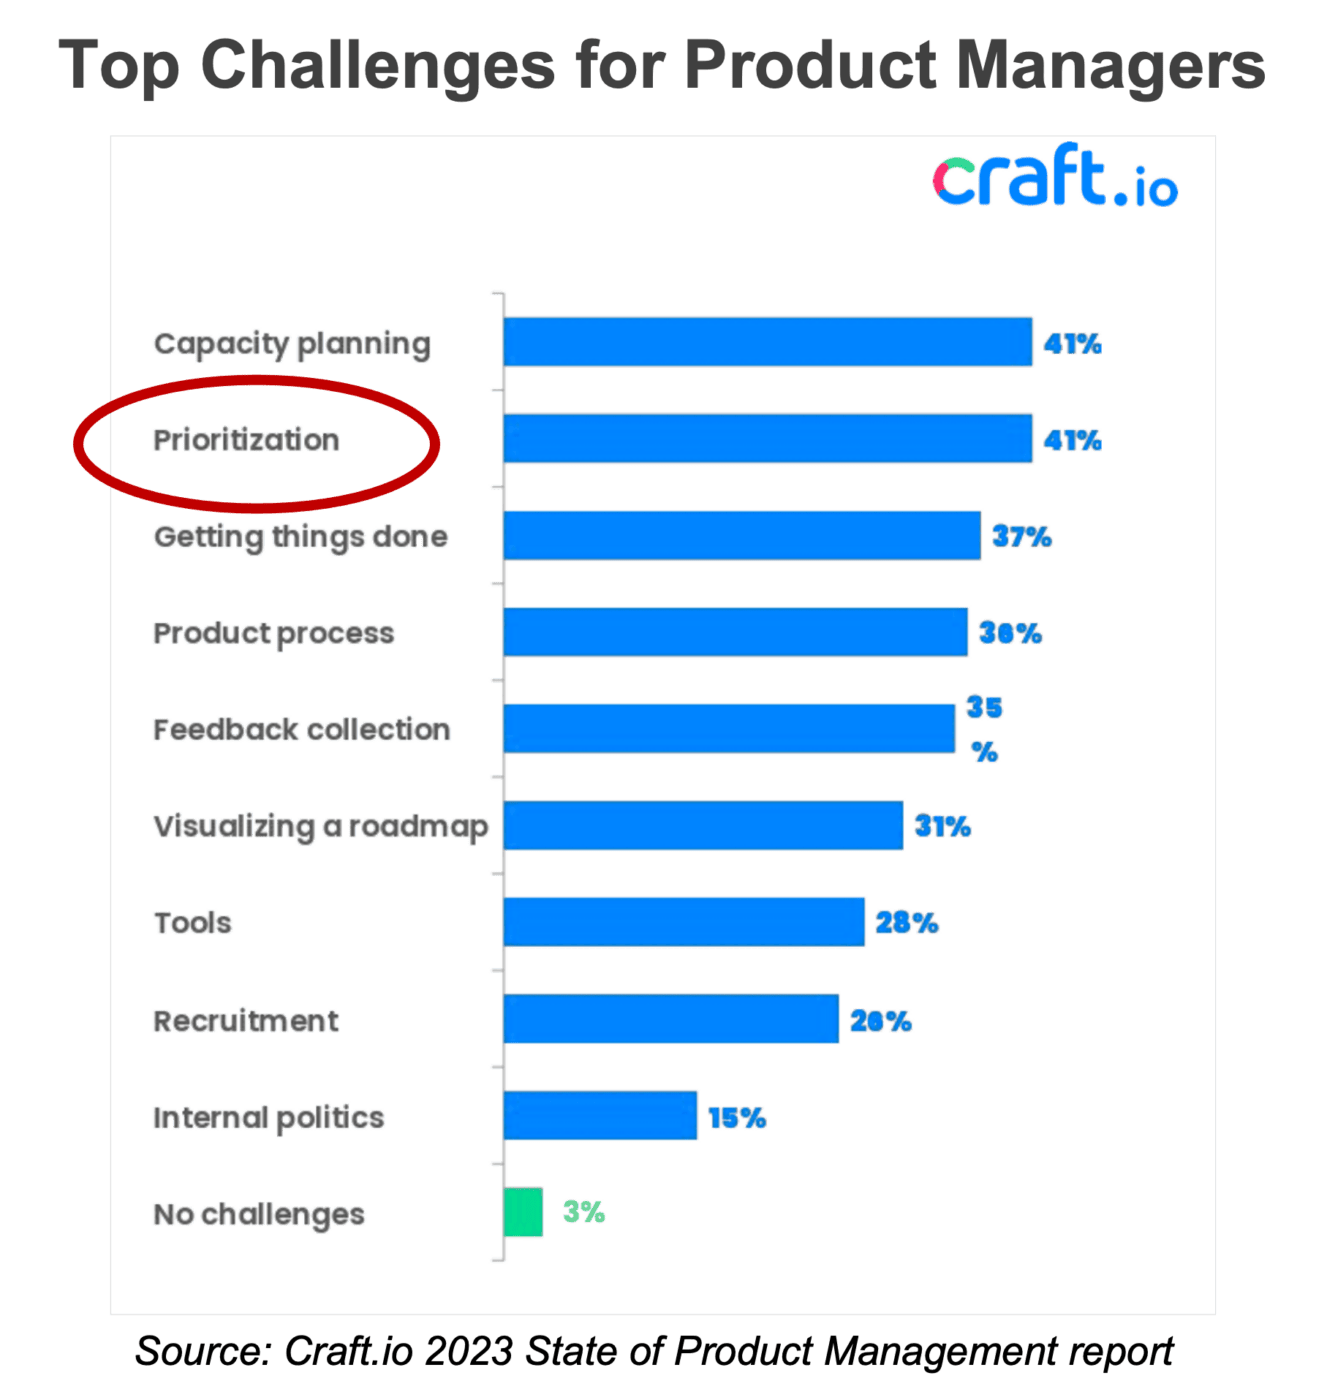 Top challenges for product managers - prioritization